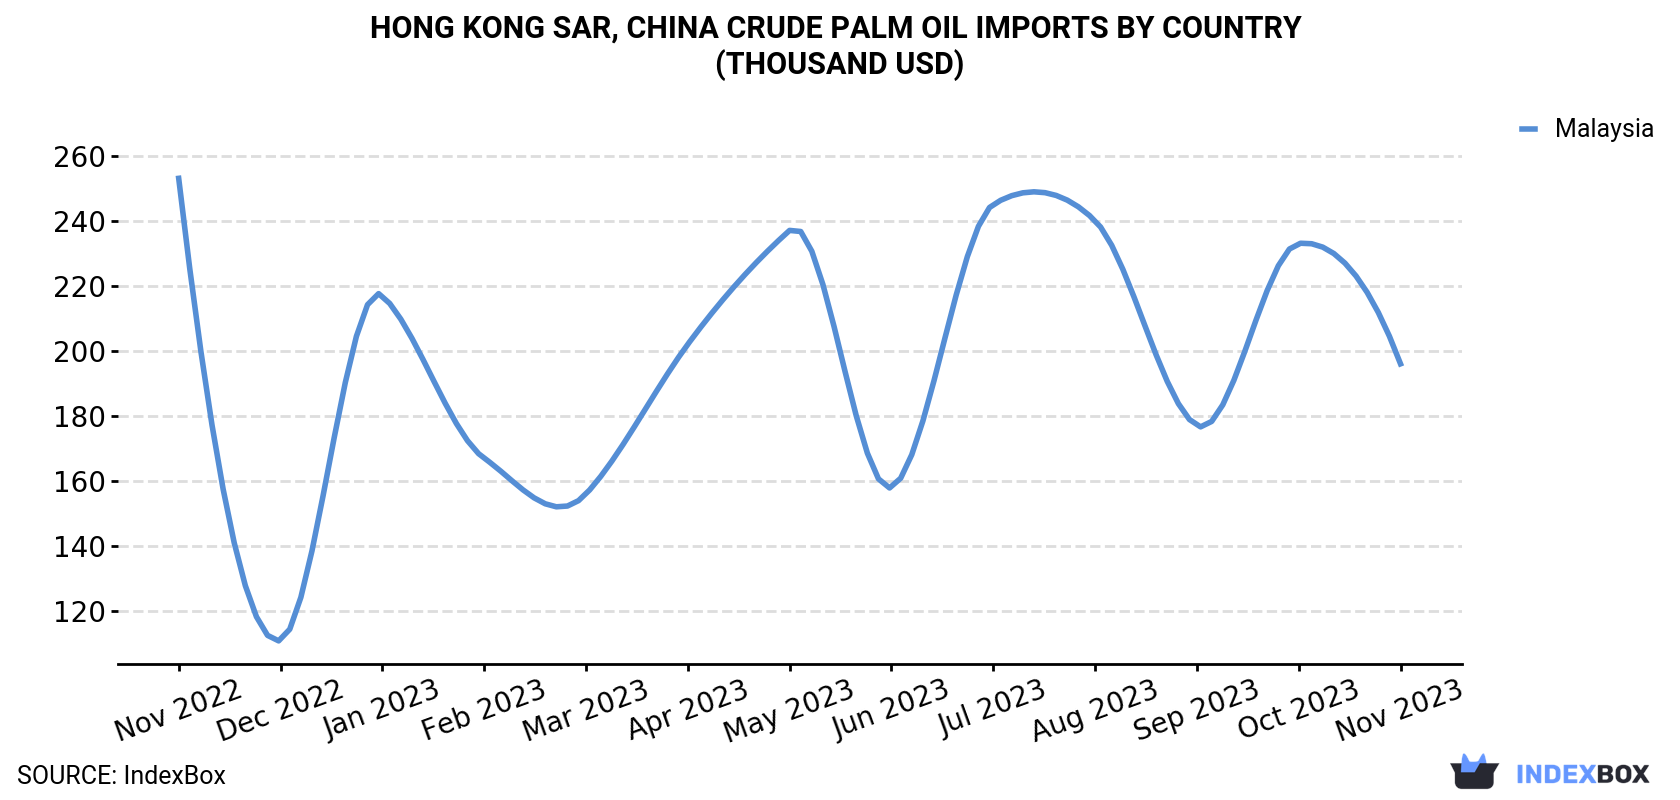 Hong Kong Crude Palm Oil Imports By Country (Thousand USD)